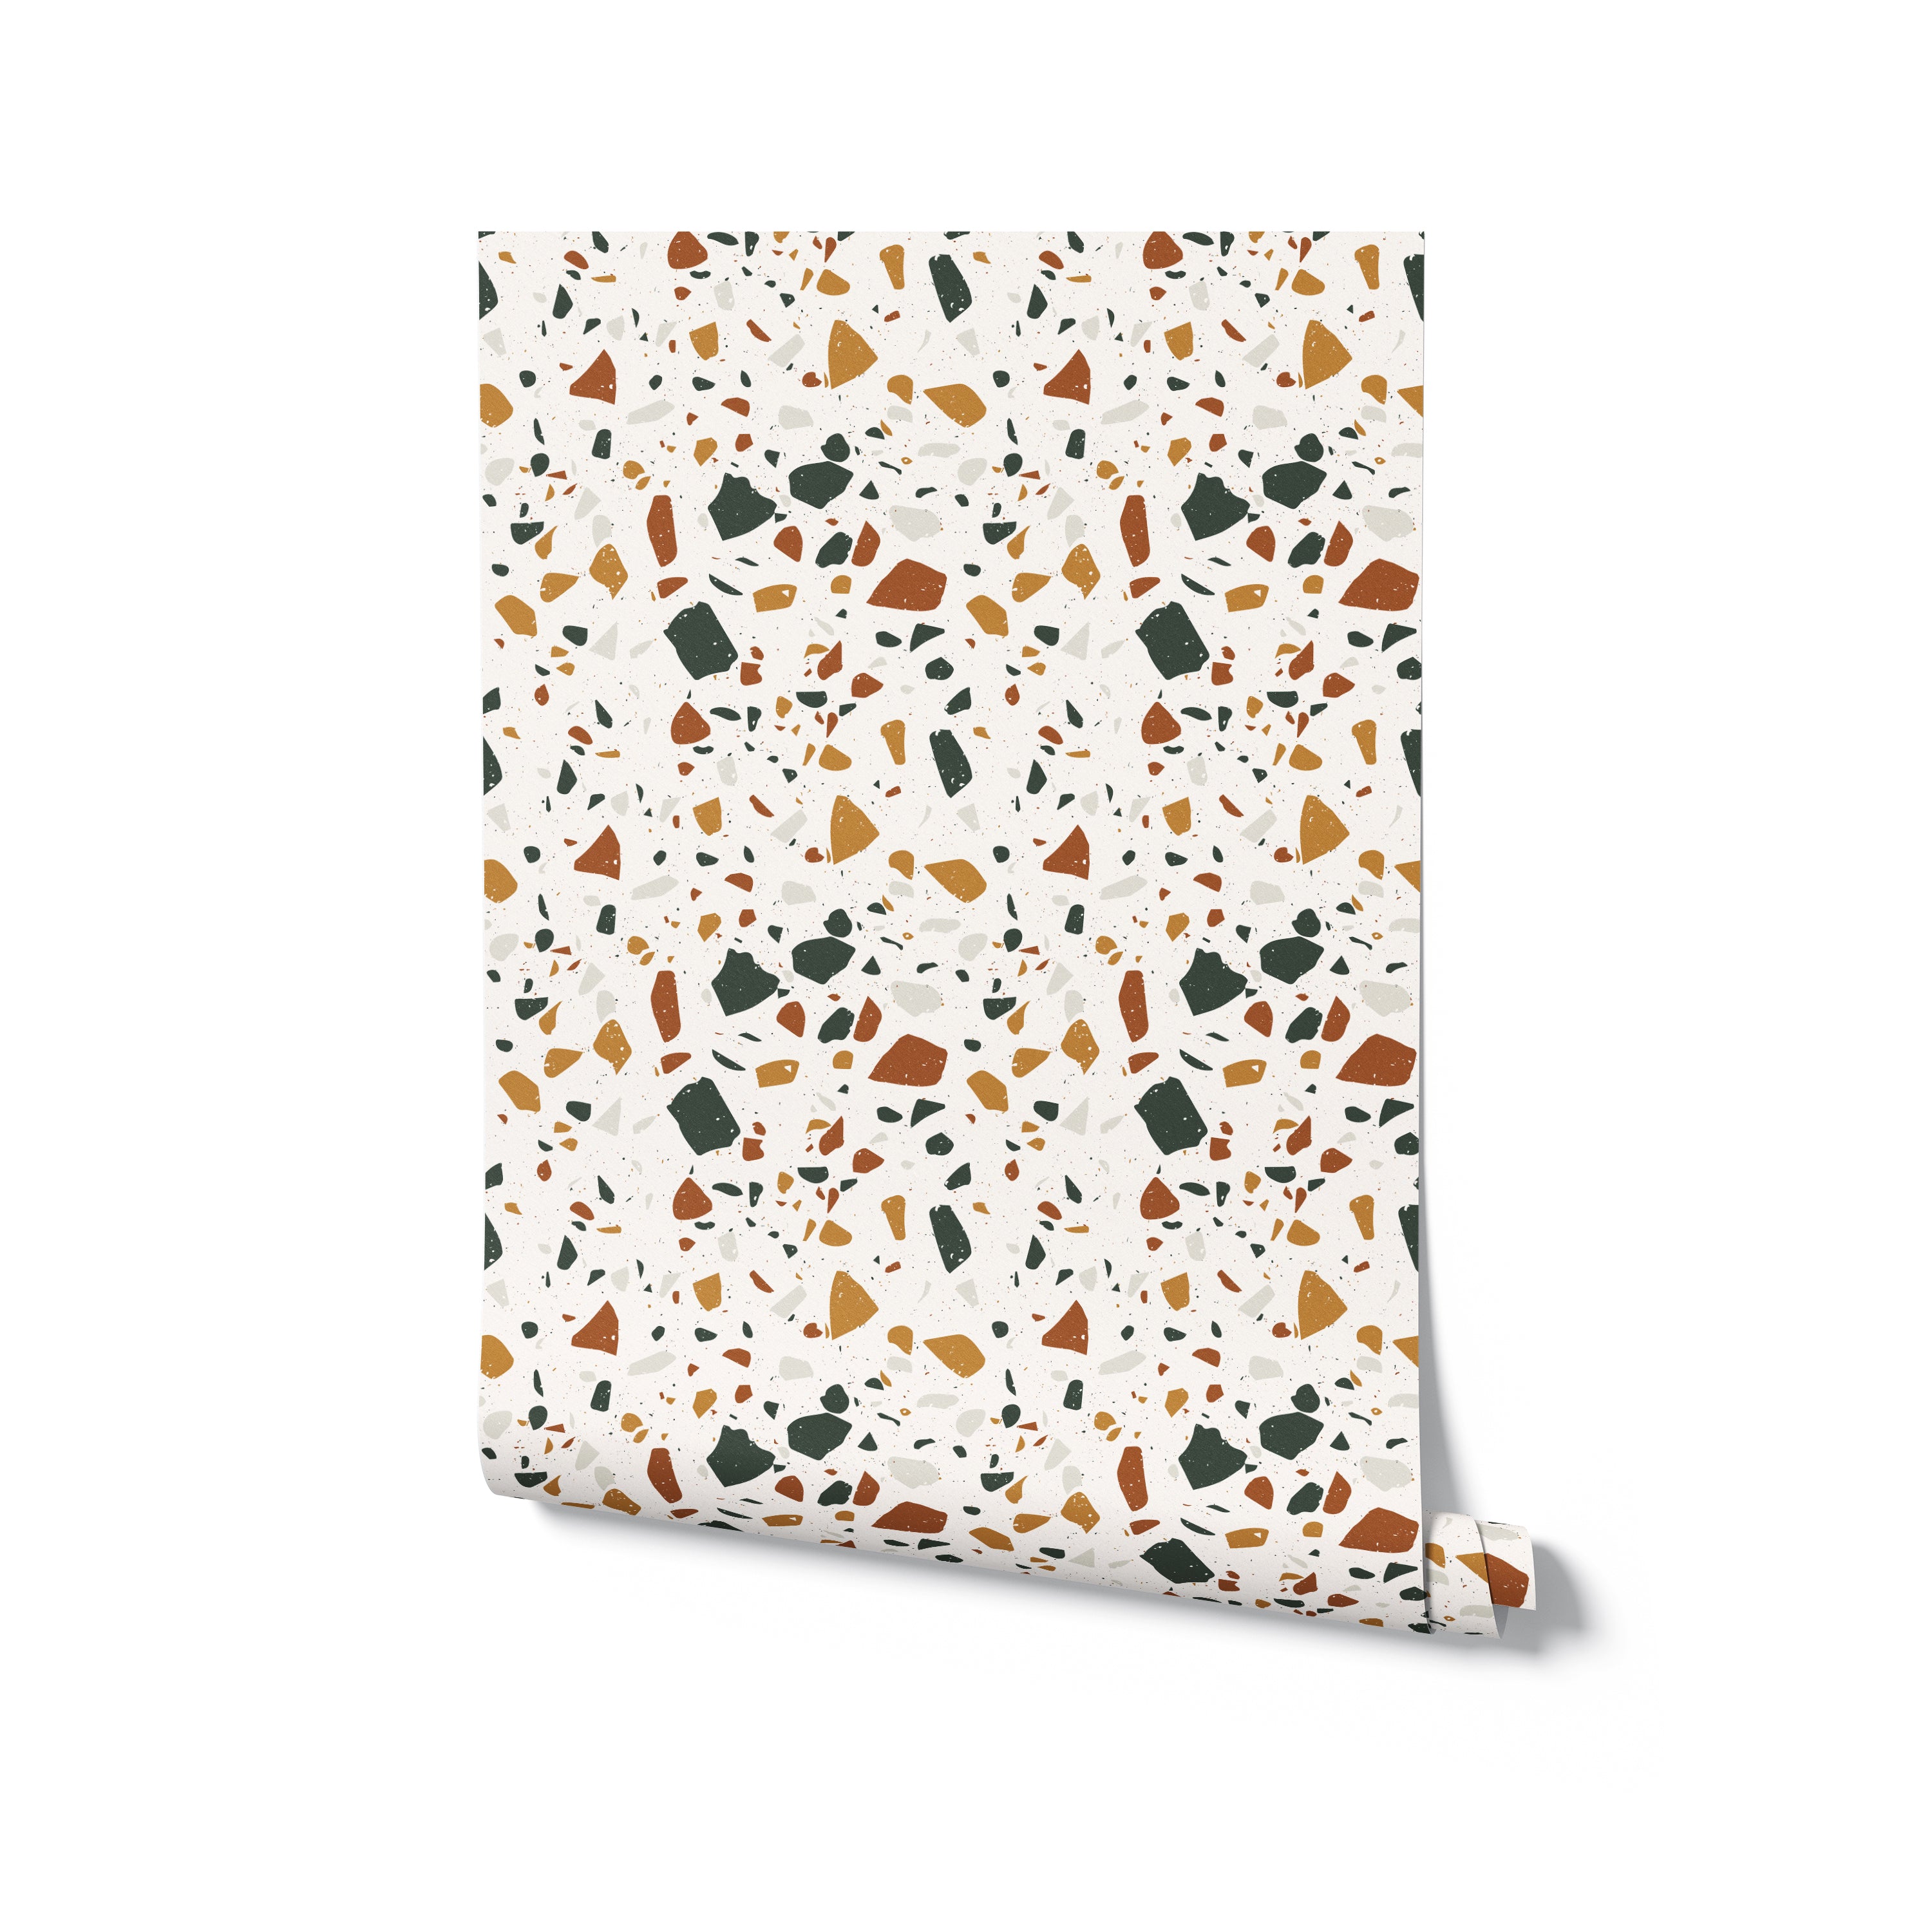 A roll of Earthy Terrazzo Wallpaper displayed vertically, showcasing a speckled pattern with various-sized pieces of orange, green, gray, and white on a light background, emphasizing its texture and color variety.